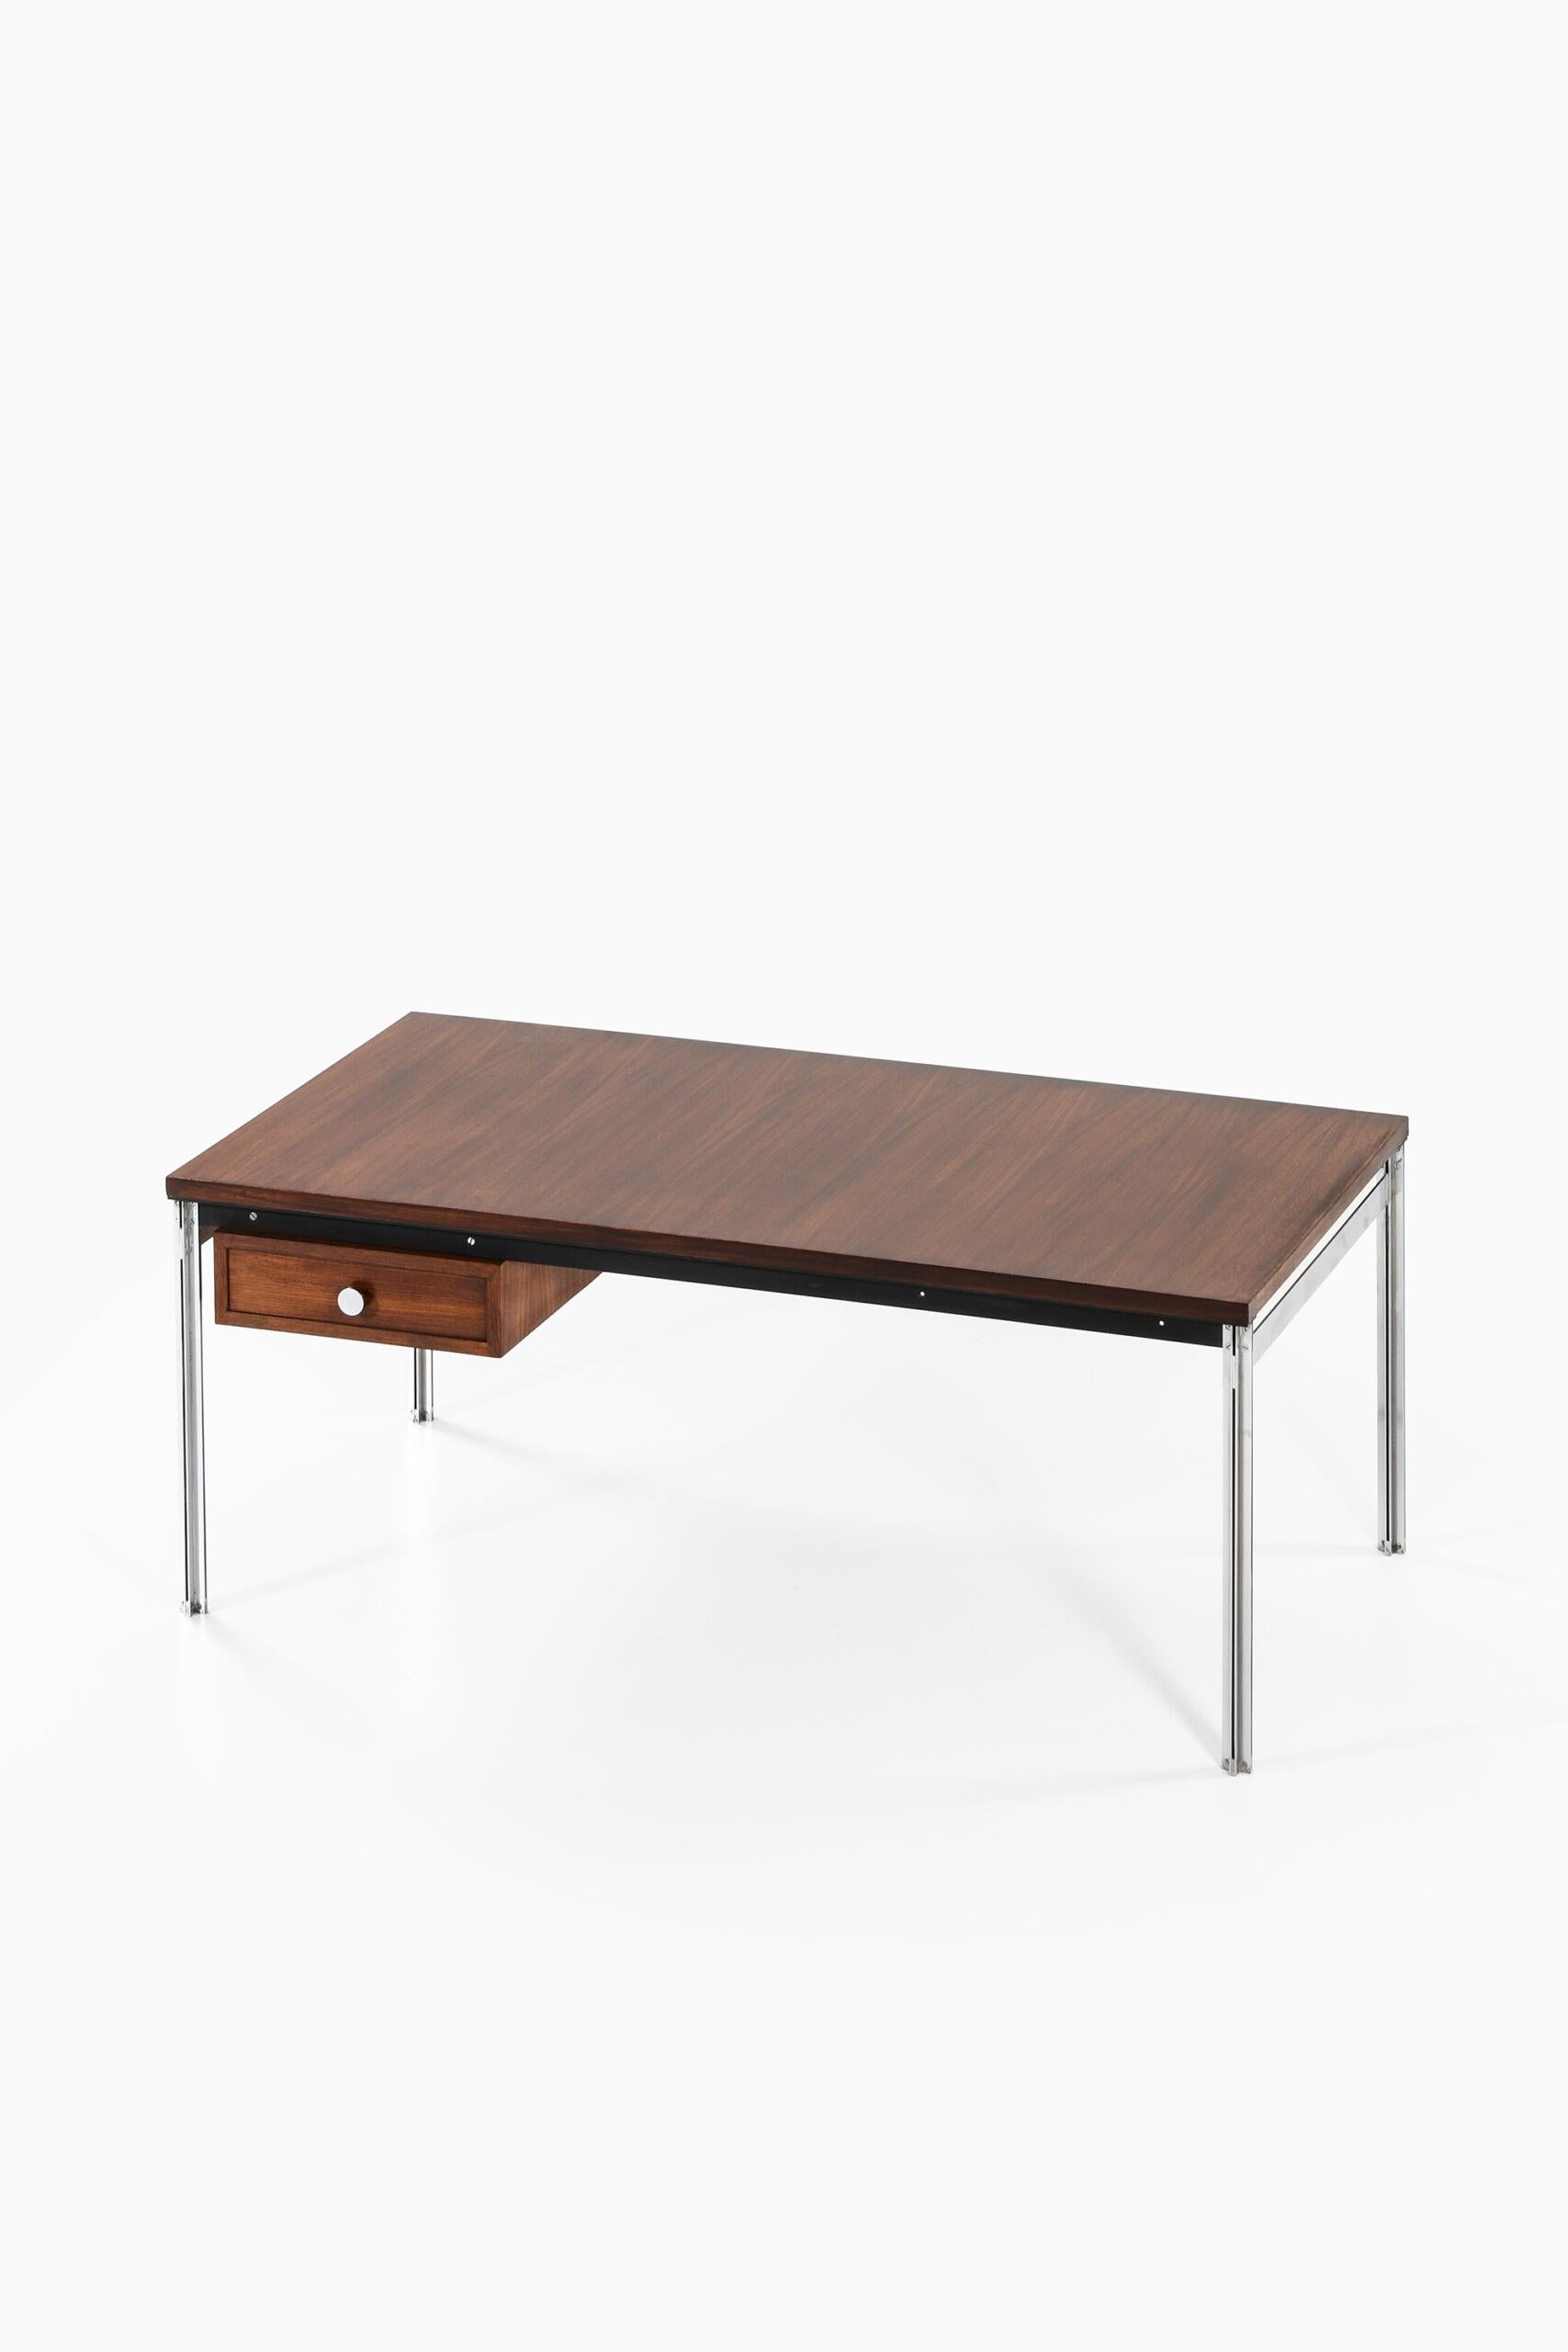 Mid-20th Century Desk Probably Produced in Sweden For Sale